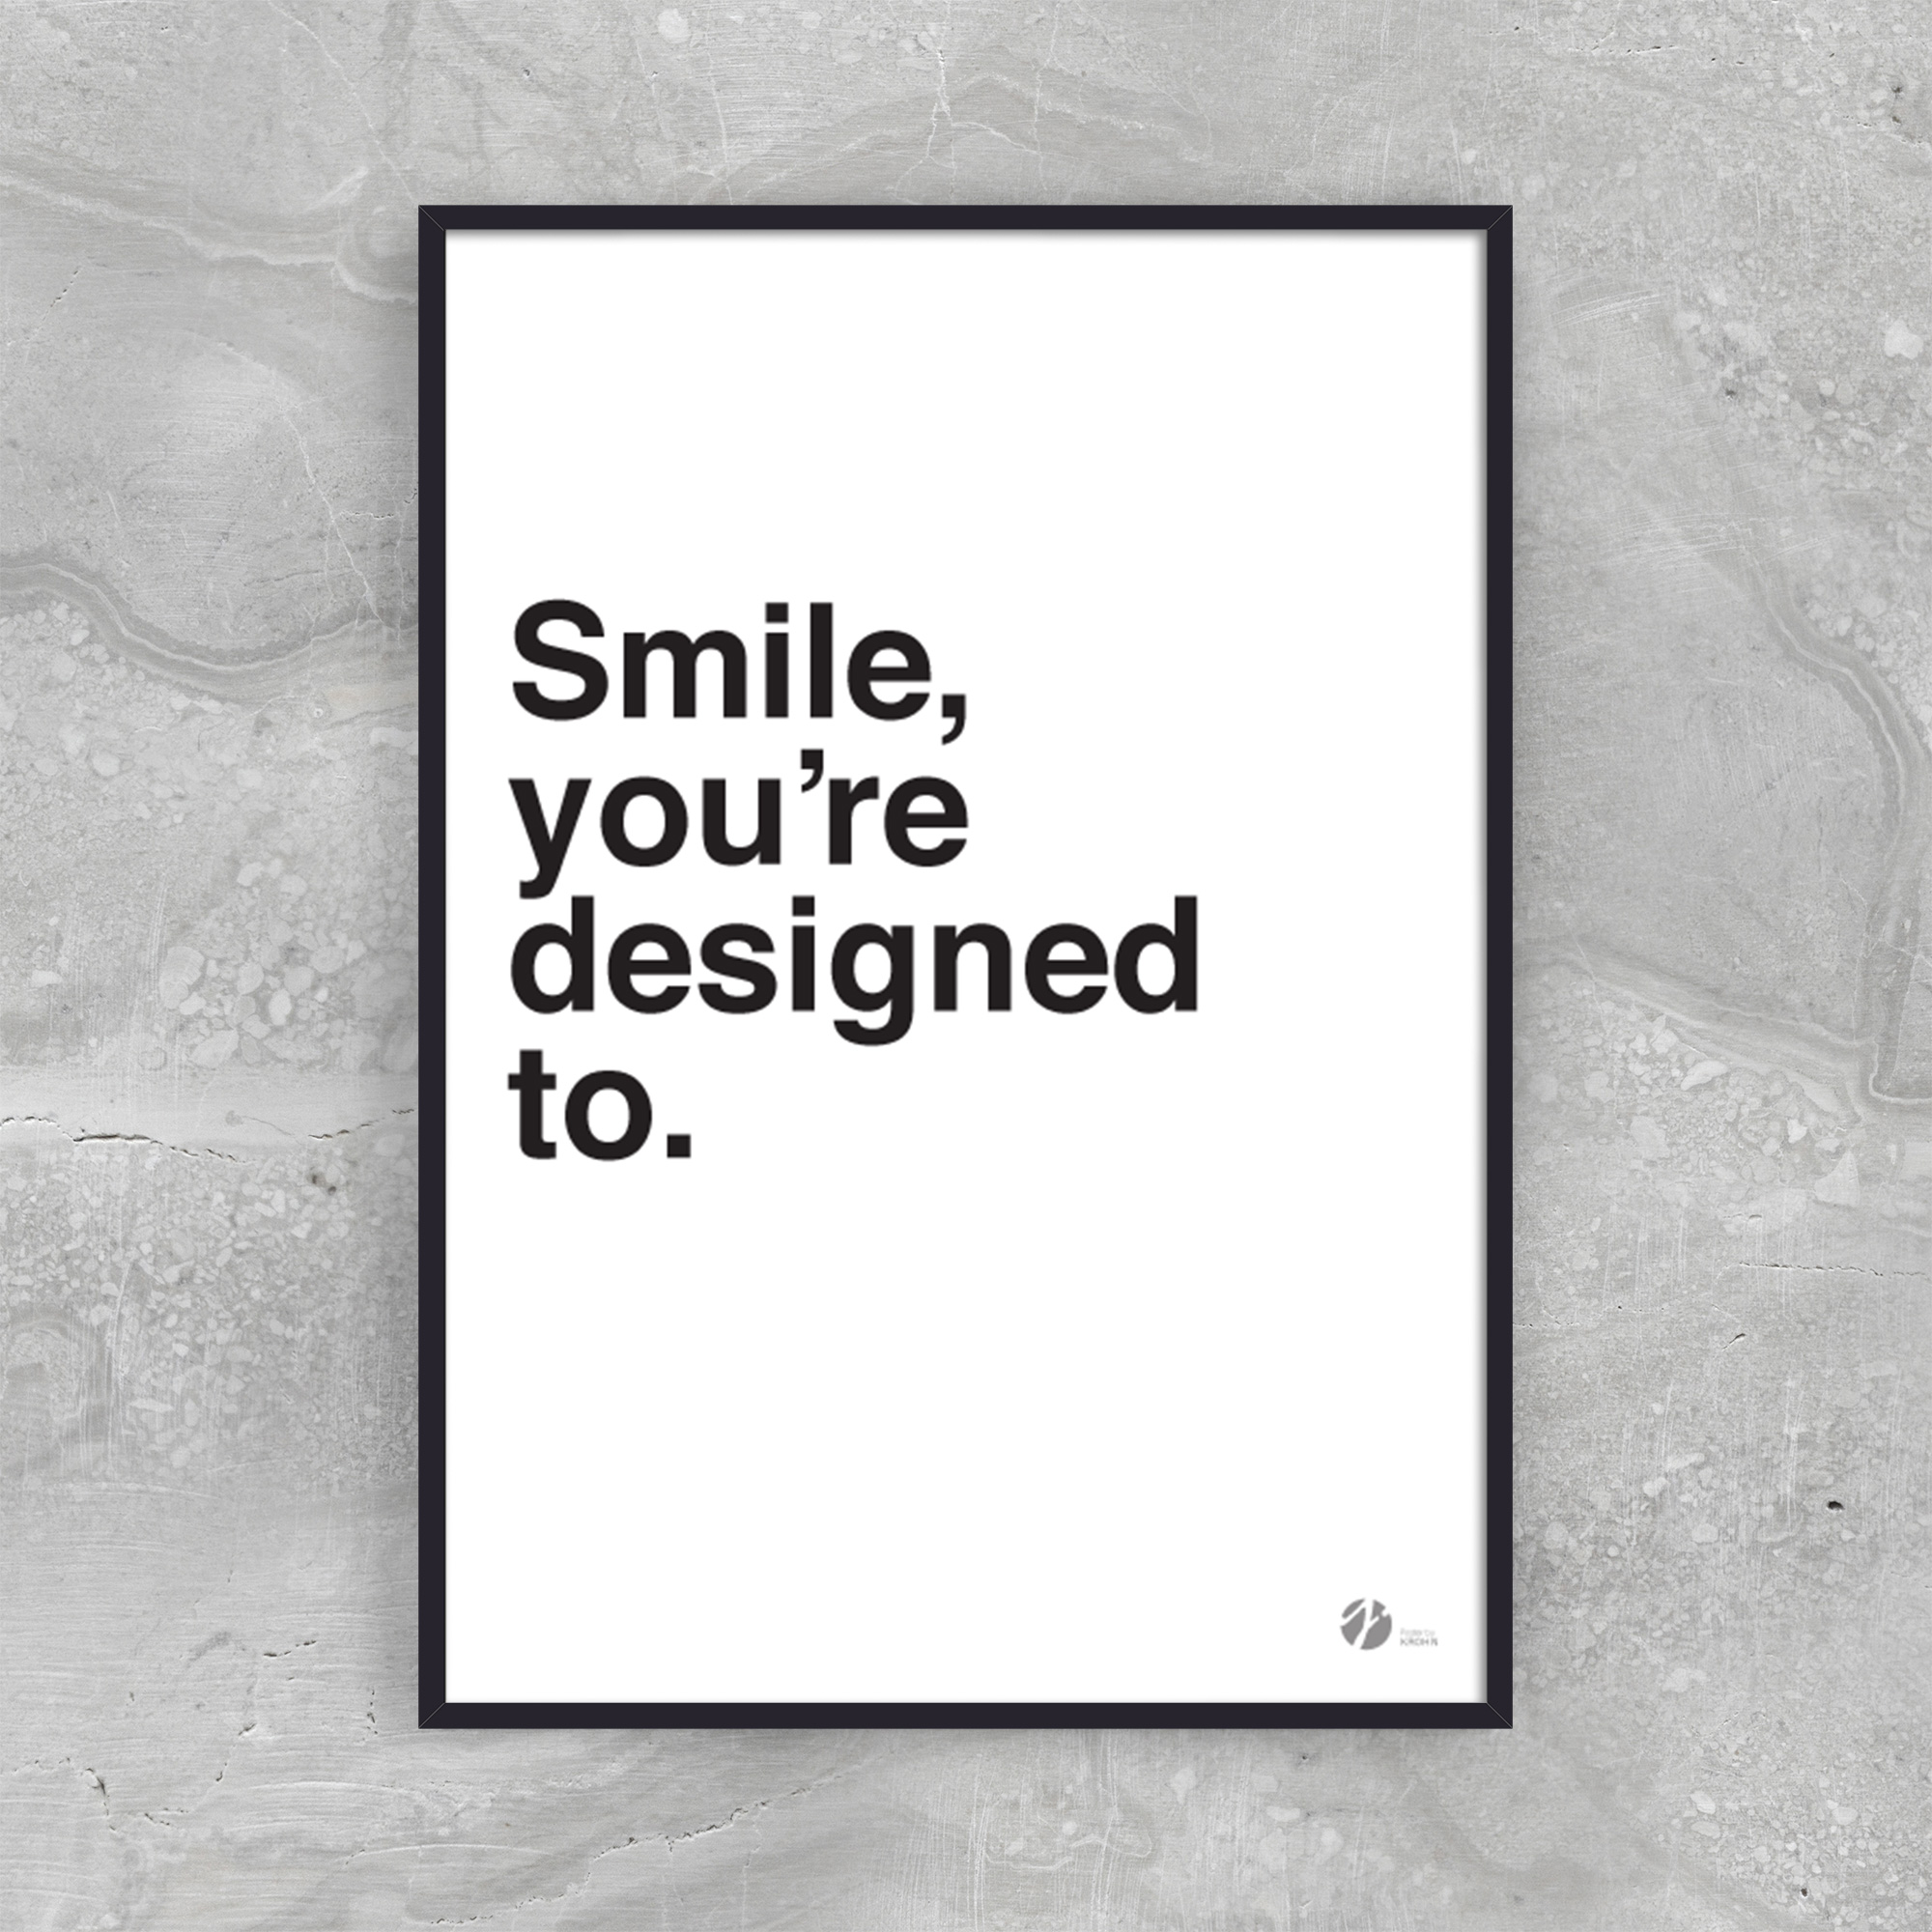 Se Smile, You Are Designed To hos Picment.dk